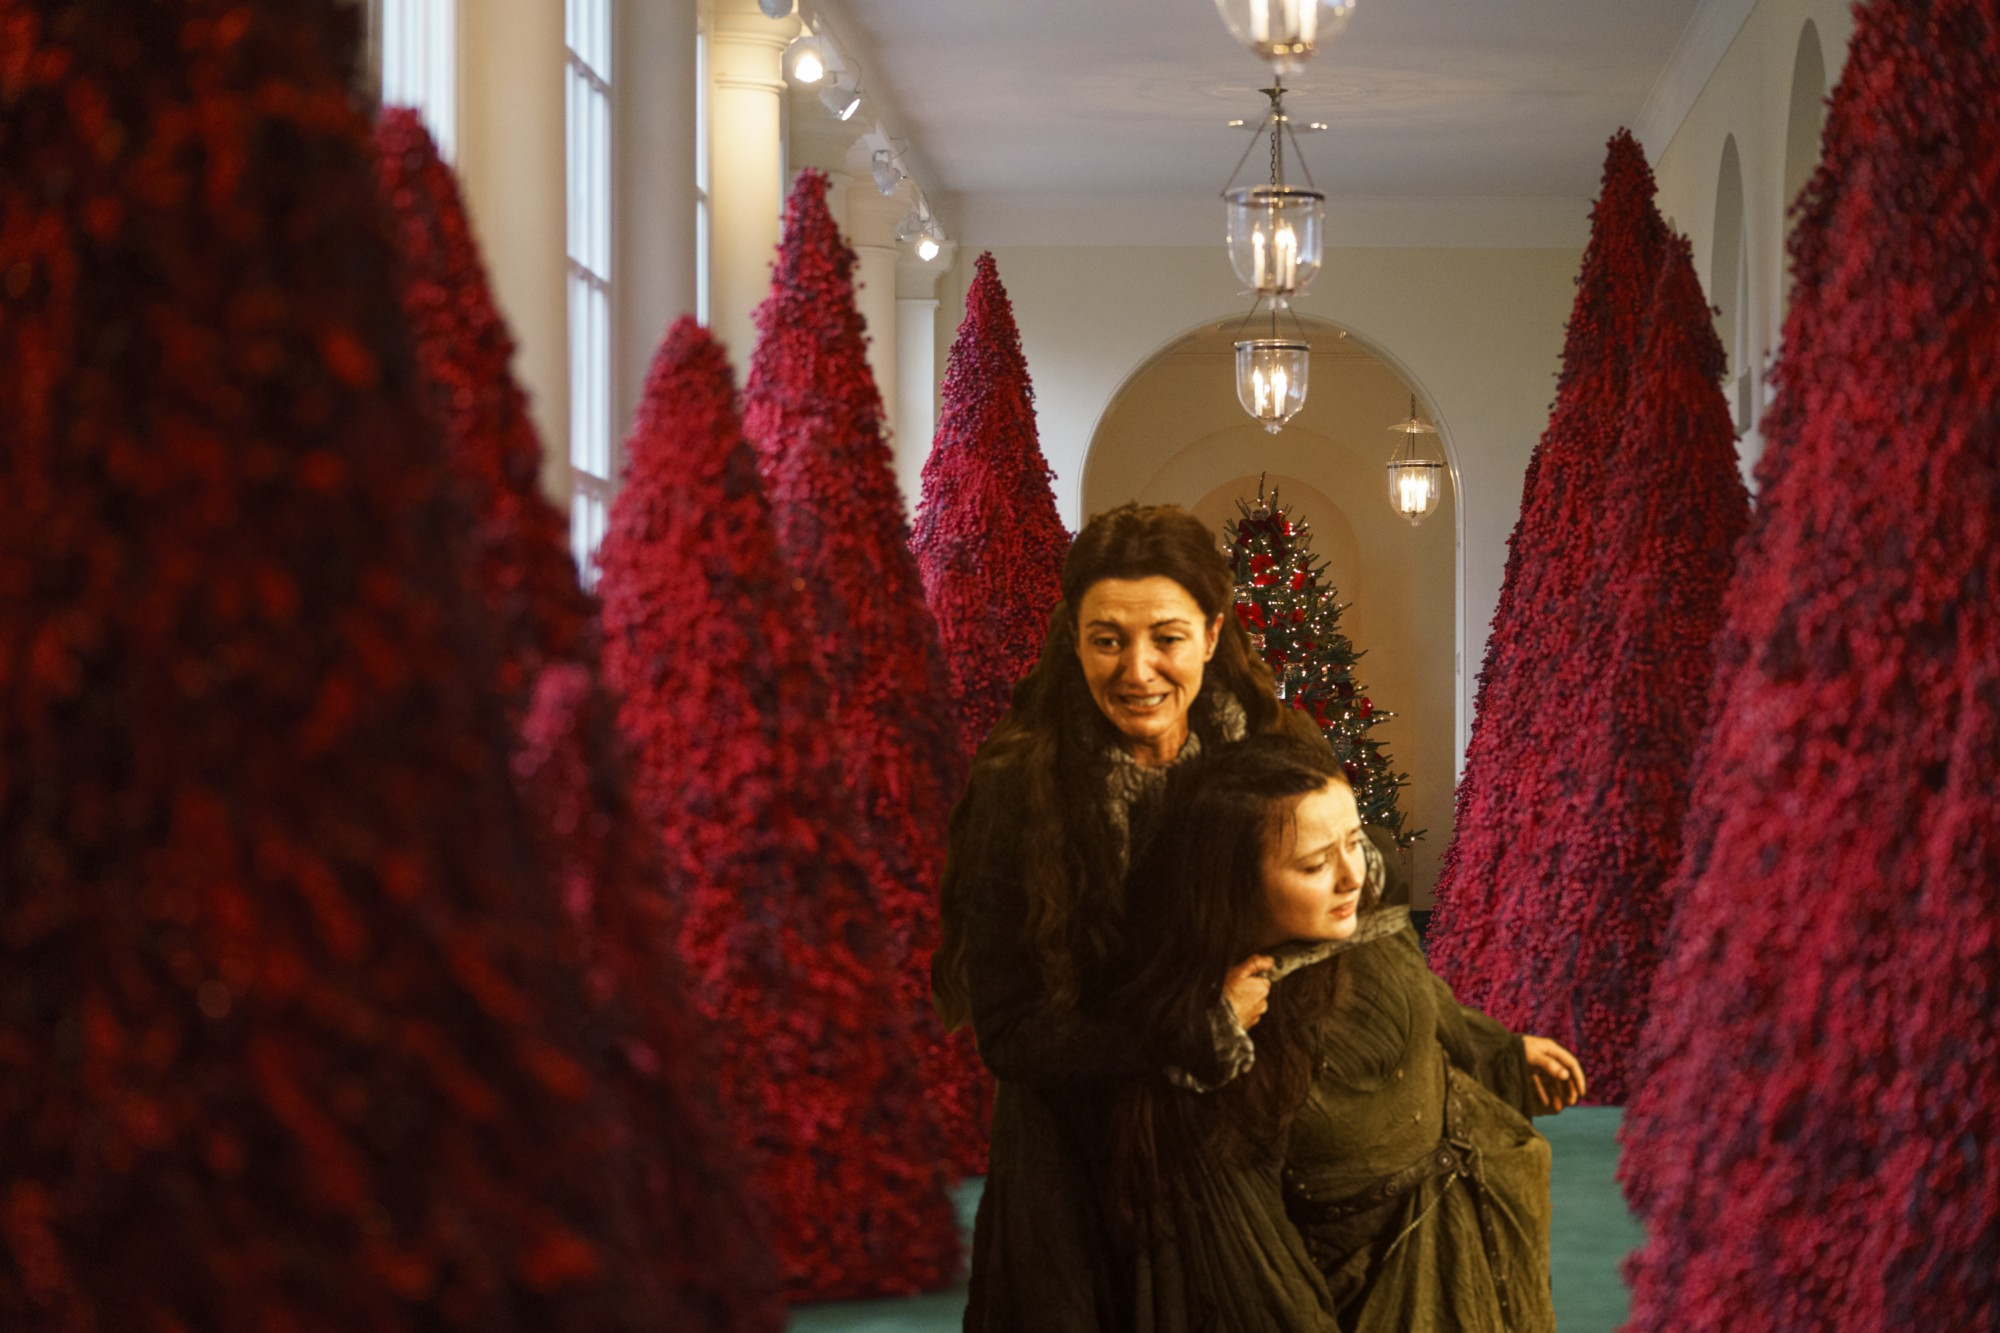 Melania decorates Casterly Rock Room at the White House for Red Christmas!